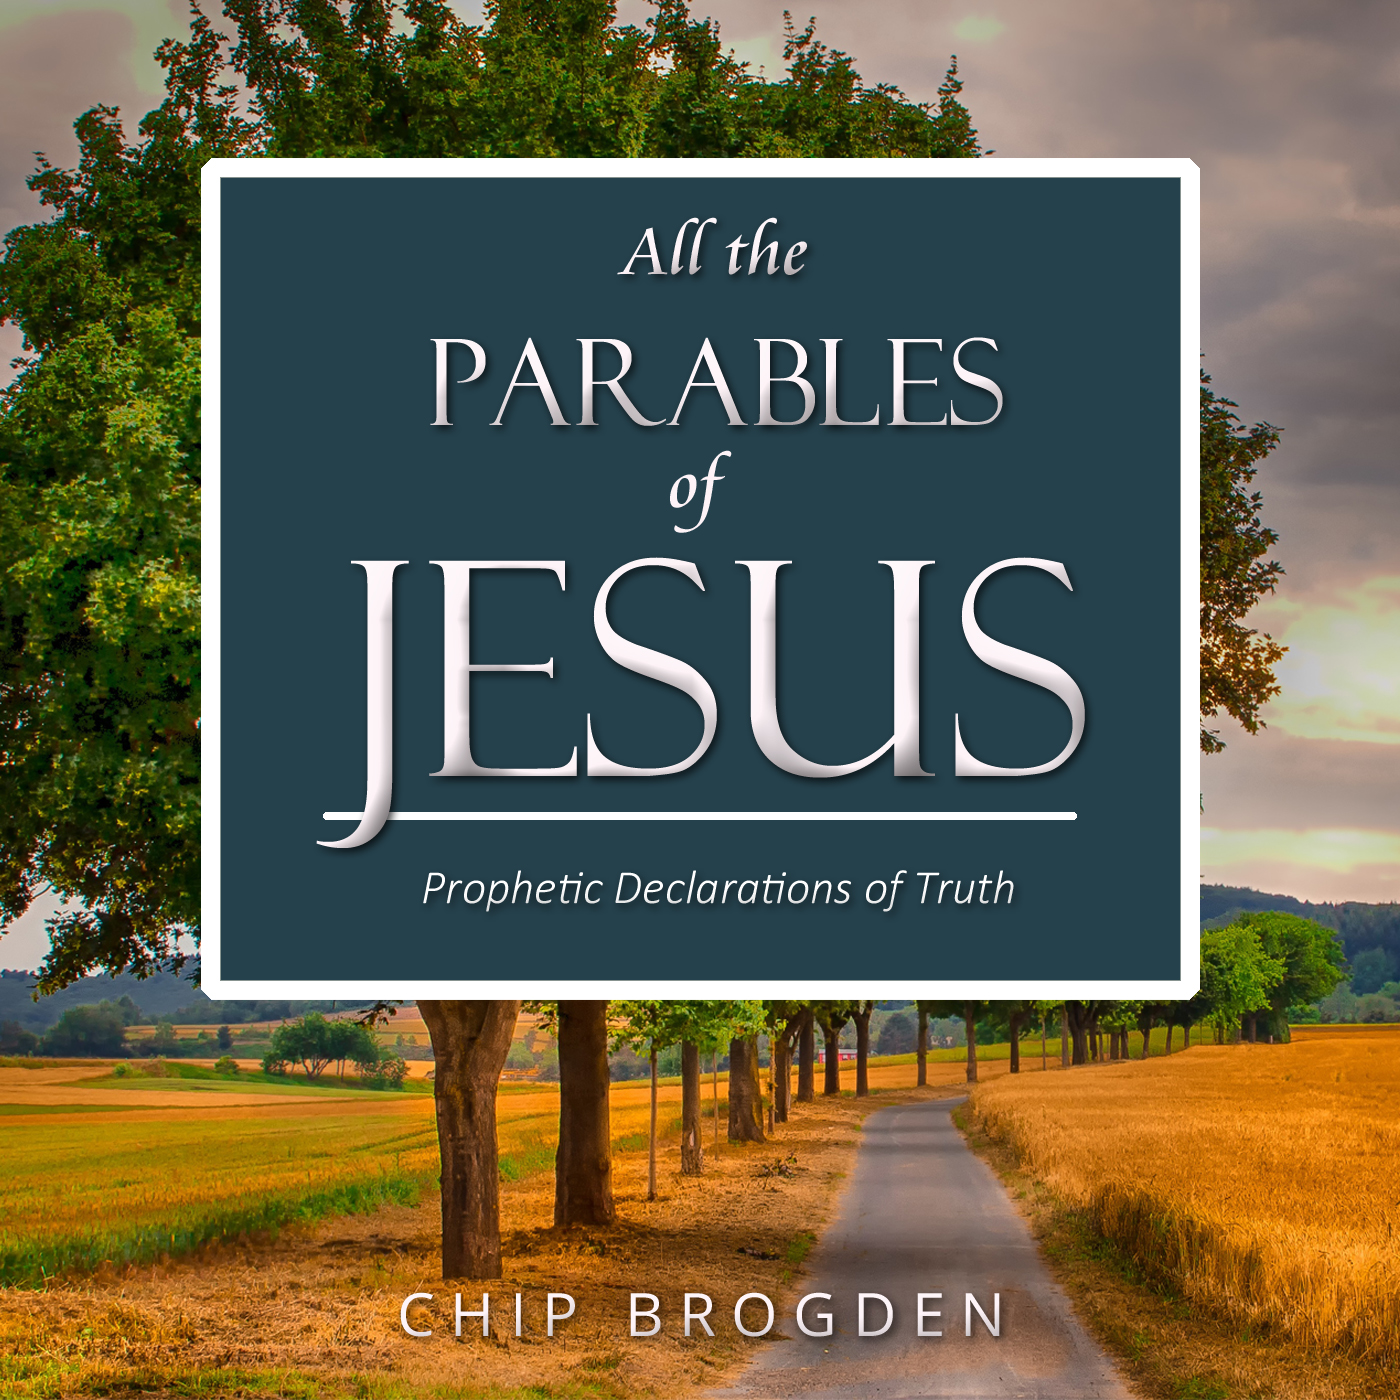 All the Parables of Jesus